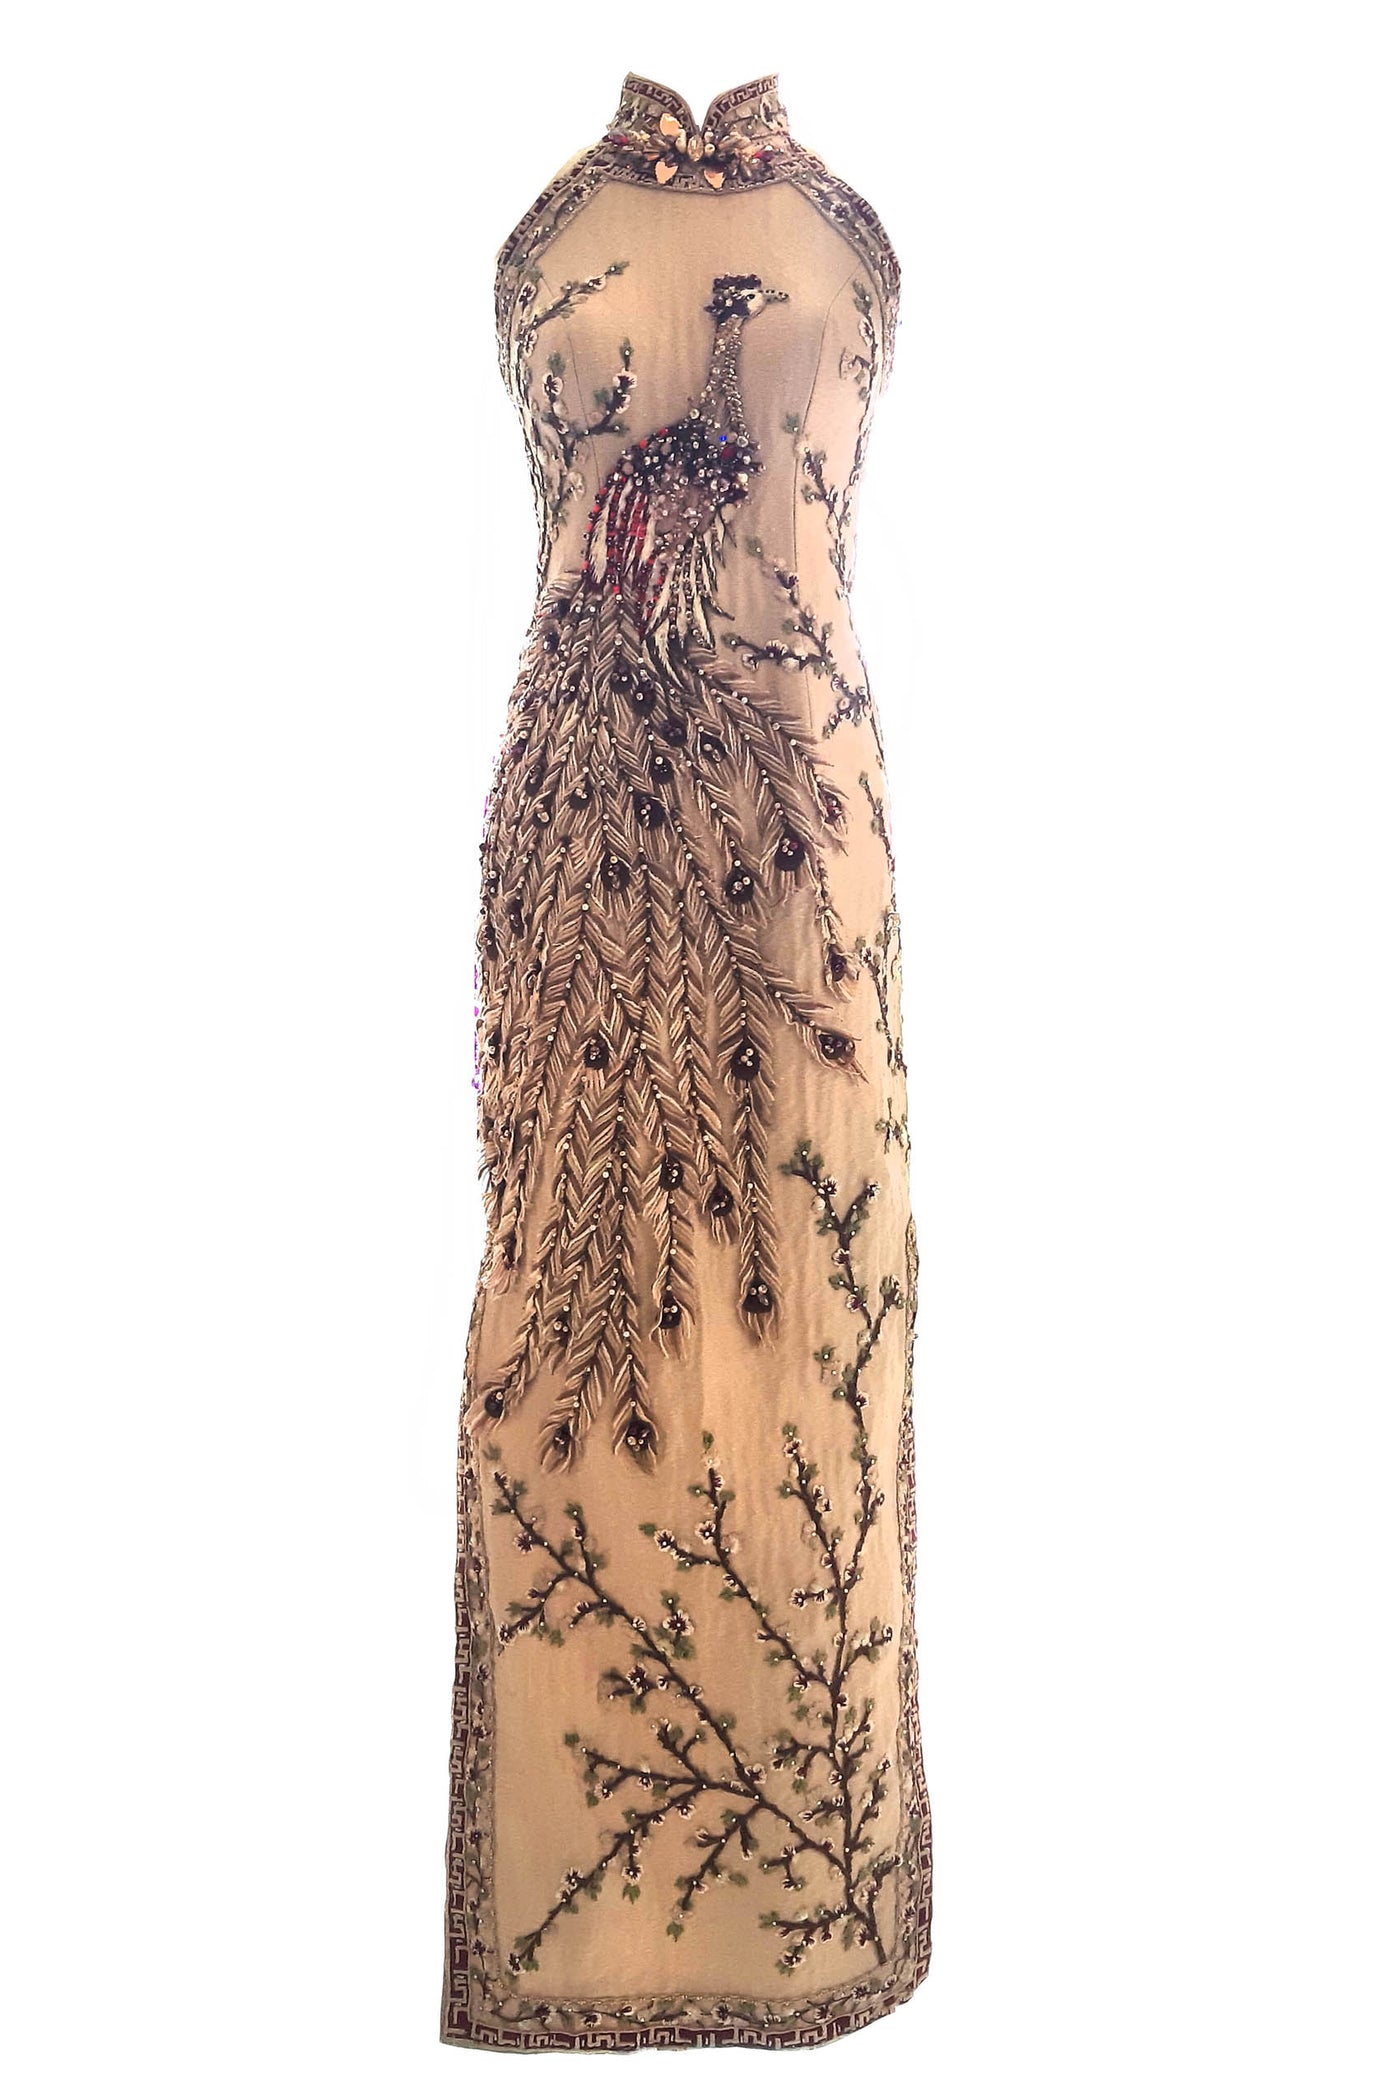 Buy : Private Label - Nude Phoenix Cheongsam Gown